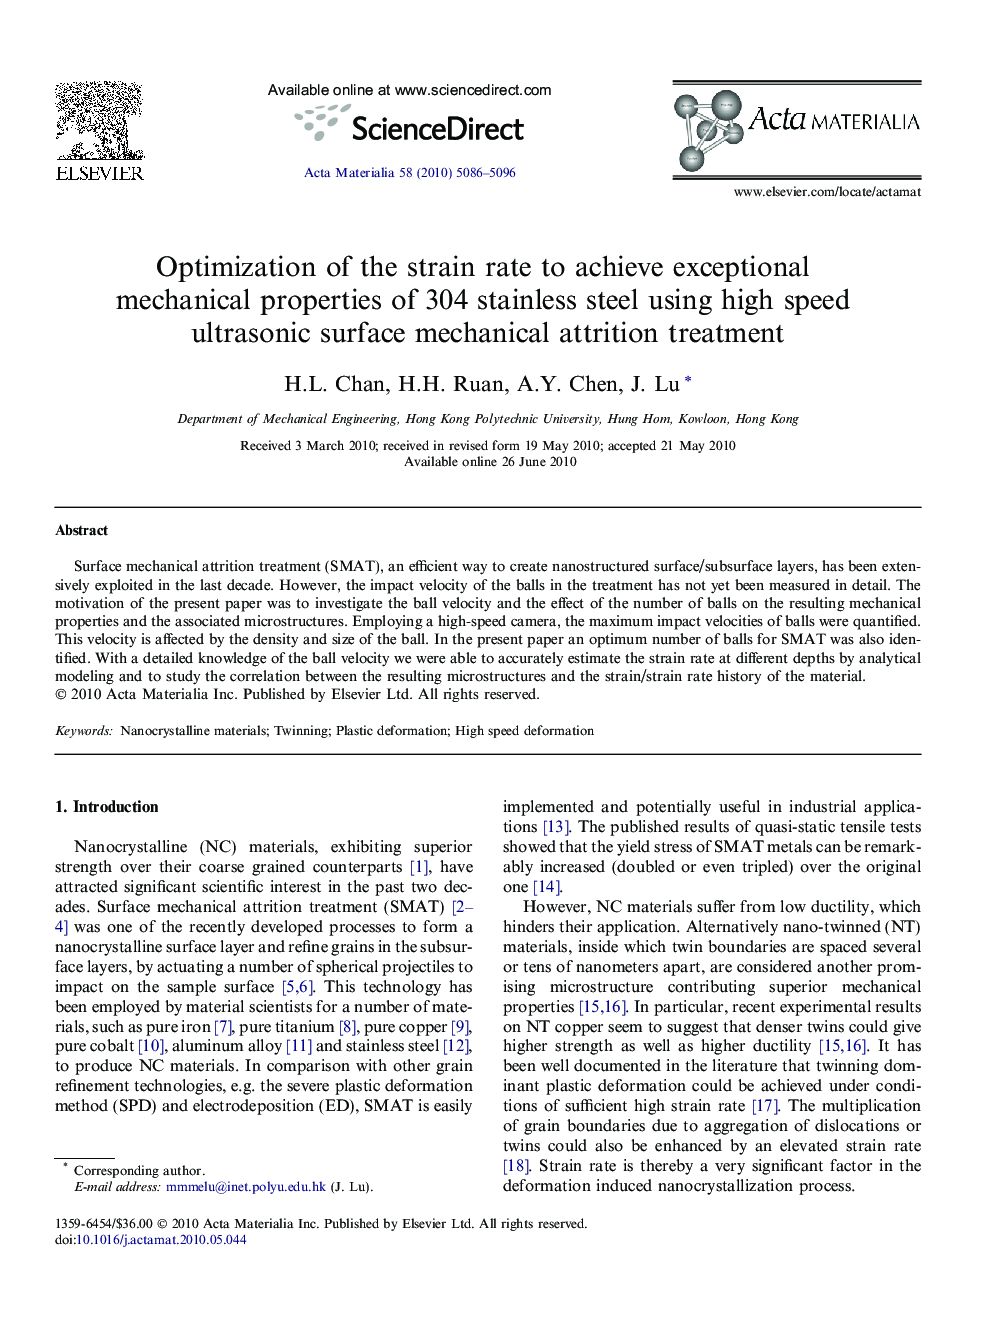 Optimization of the strain rate to achieve exceptional mechanical properties of 304 stainless steel using high speed ultrasonic surface mechanical attrition treatment